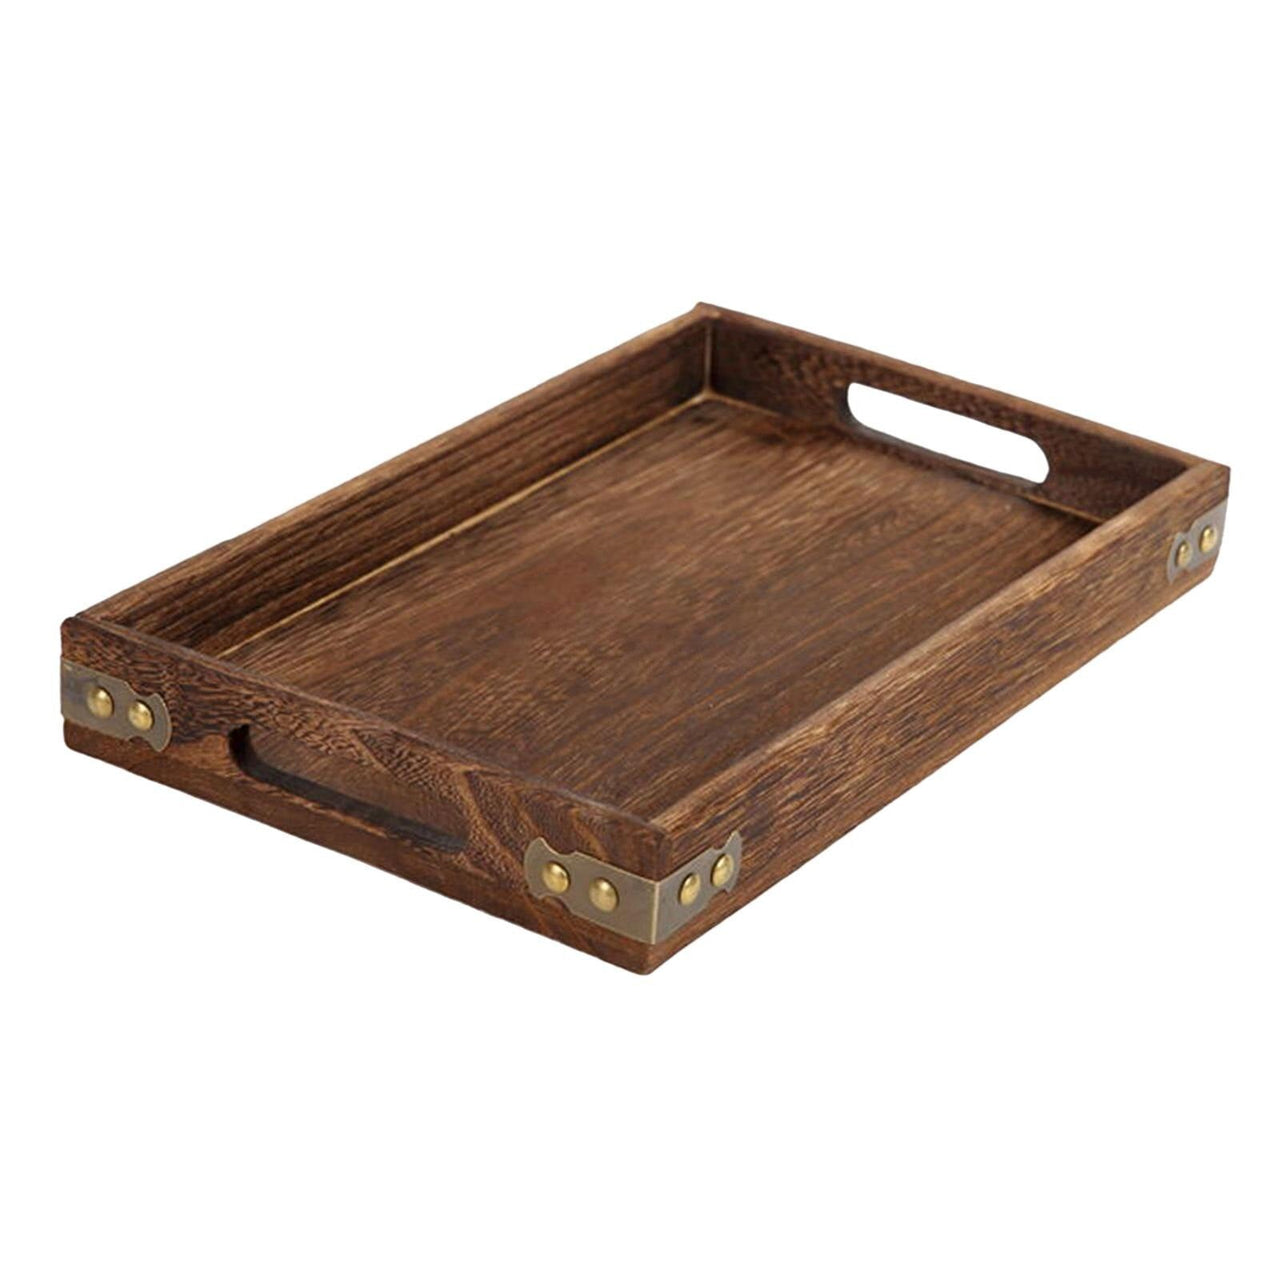 Rustic Rectangular Wooden Serving Tray with Handle - Casatrail.com